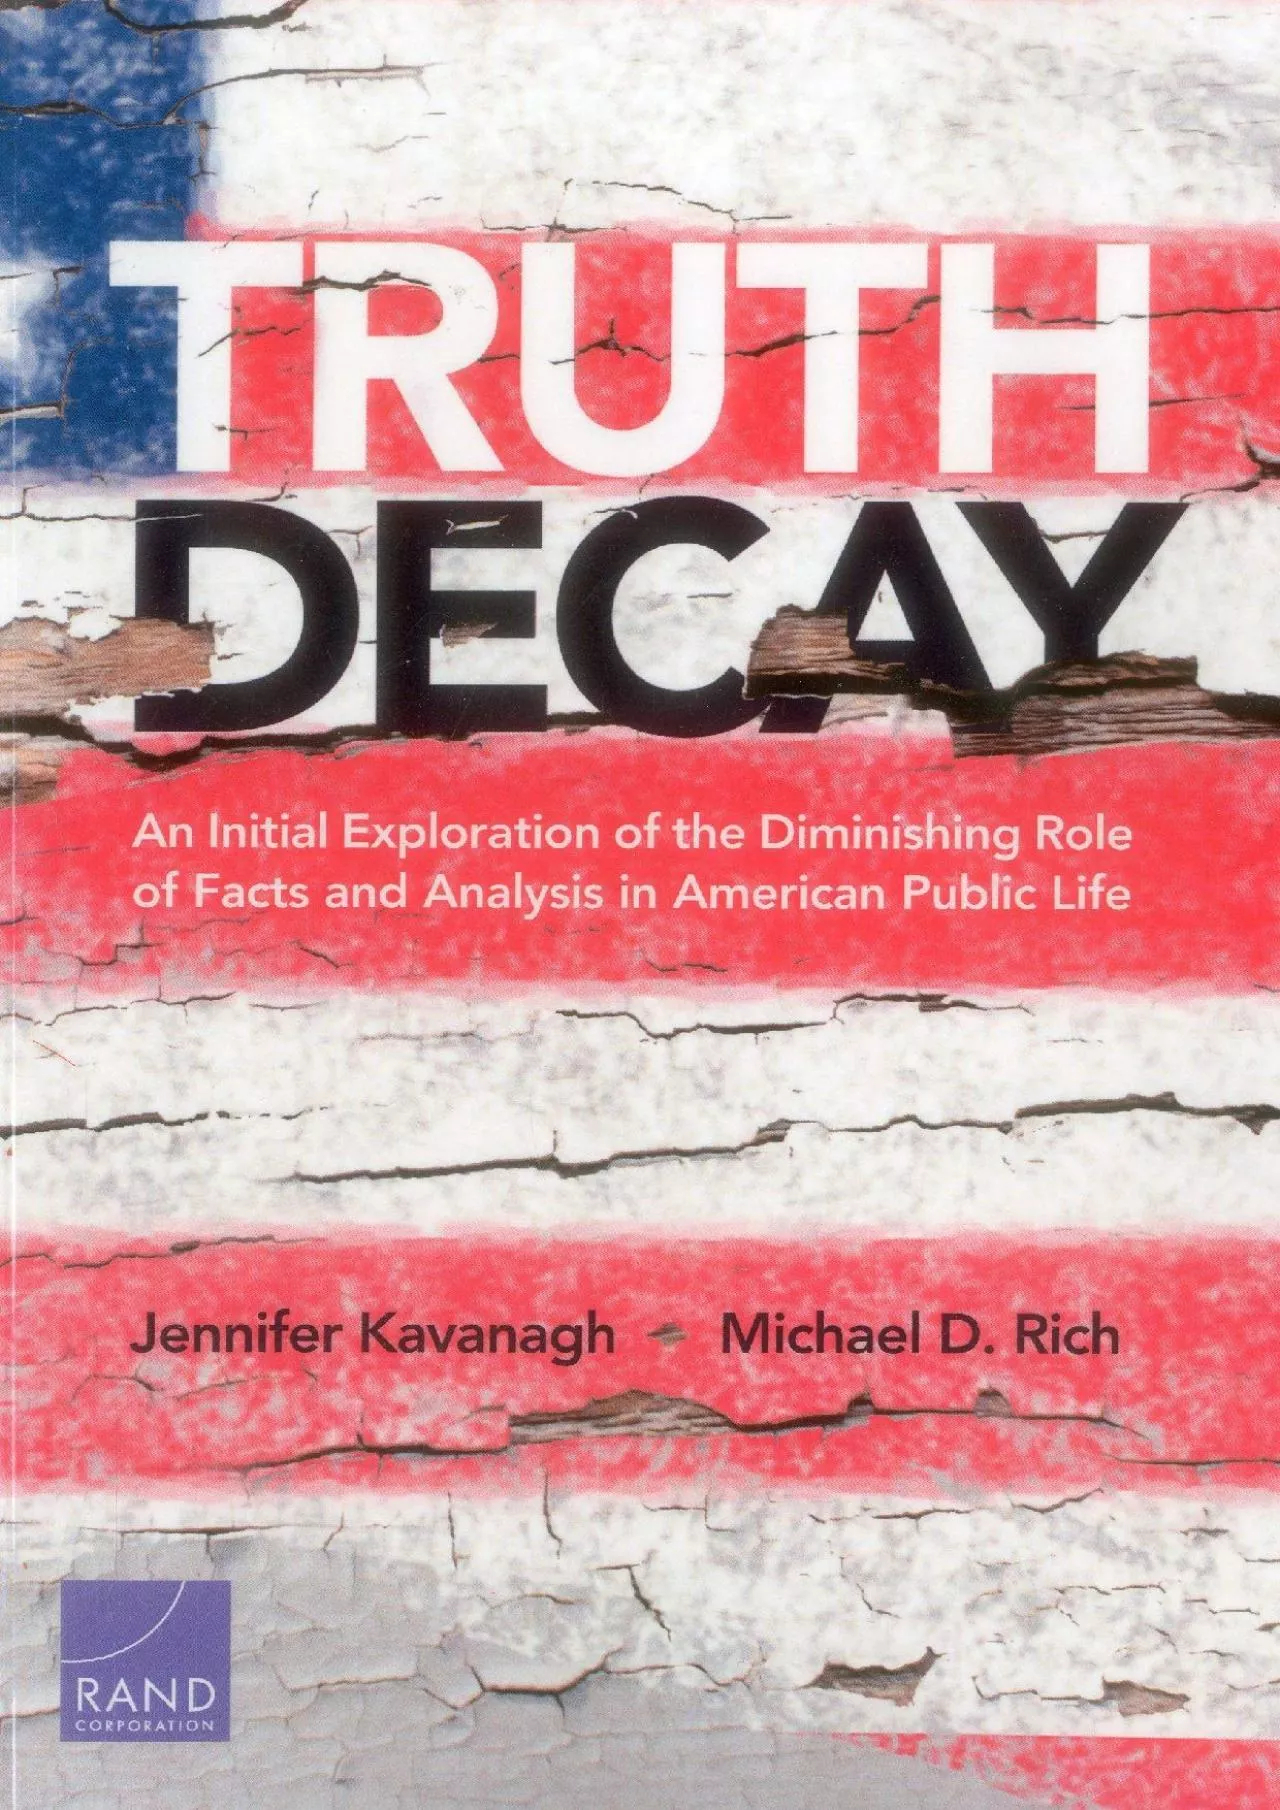 (EBOOK)-Truth Decay: An Initial Exploration of the Diminishing Role of Facts and Analysis